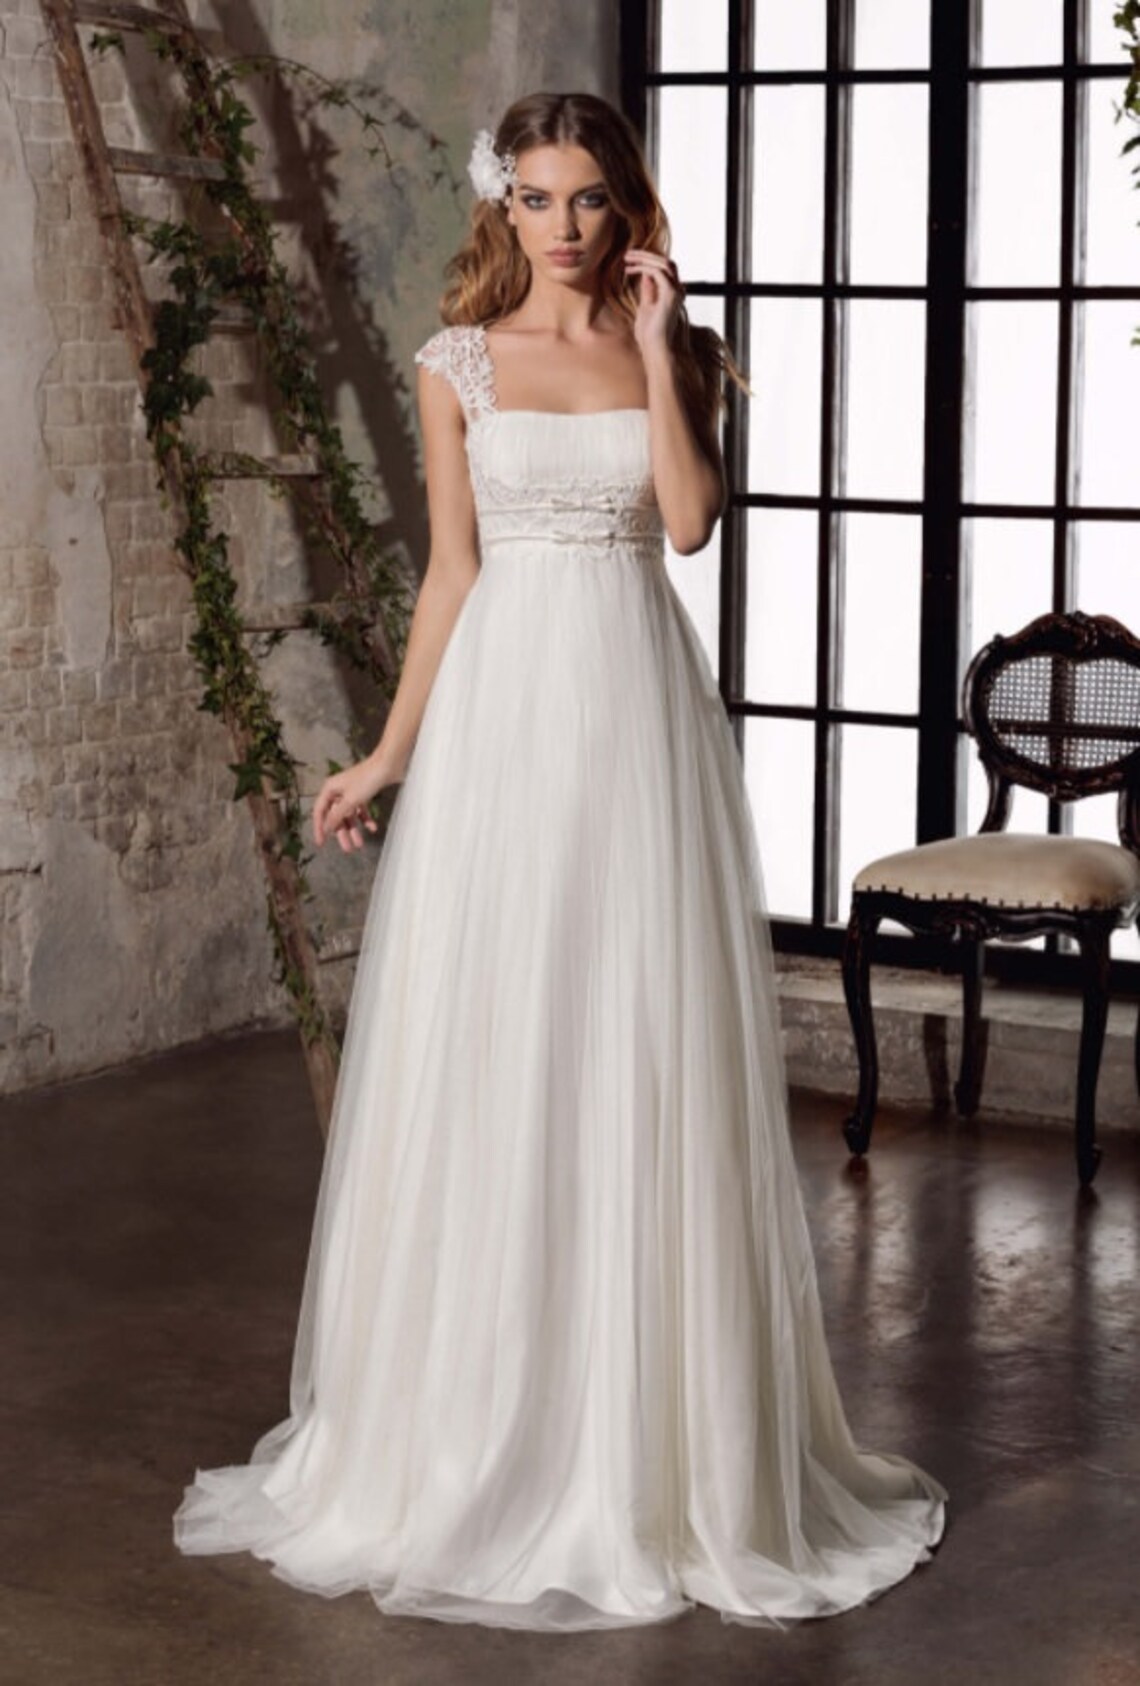 What Are the Best Wedding Dress Styles for Larger Chests? - Zola